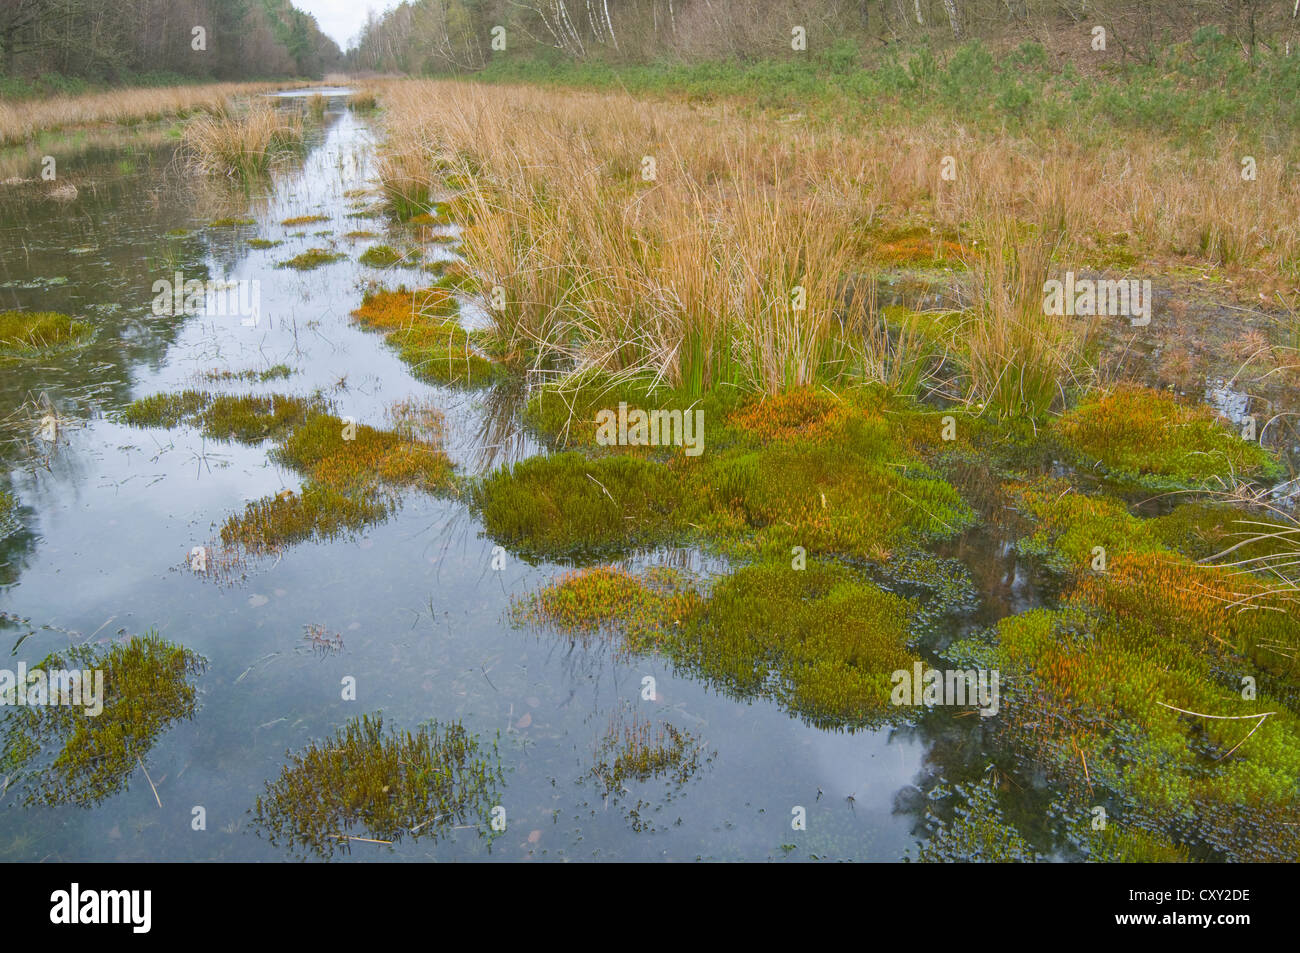 Mosses in a side canal of the Ems River, Hemsen, Emsland, Lower Saxony Stock Photo